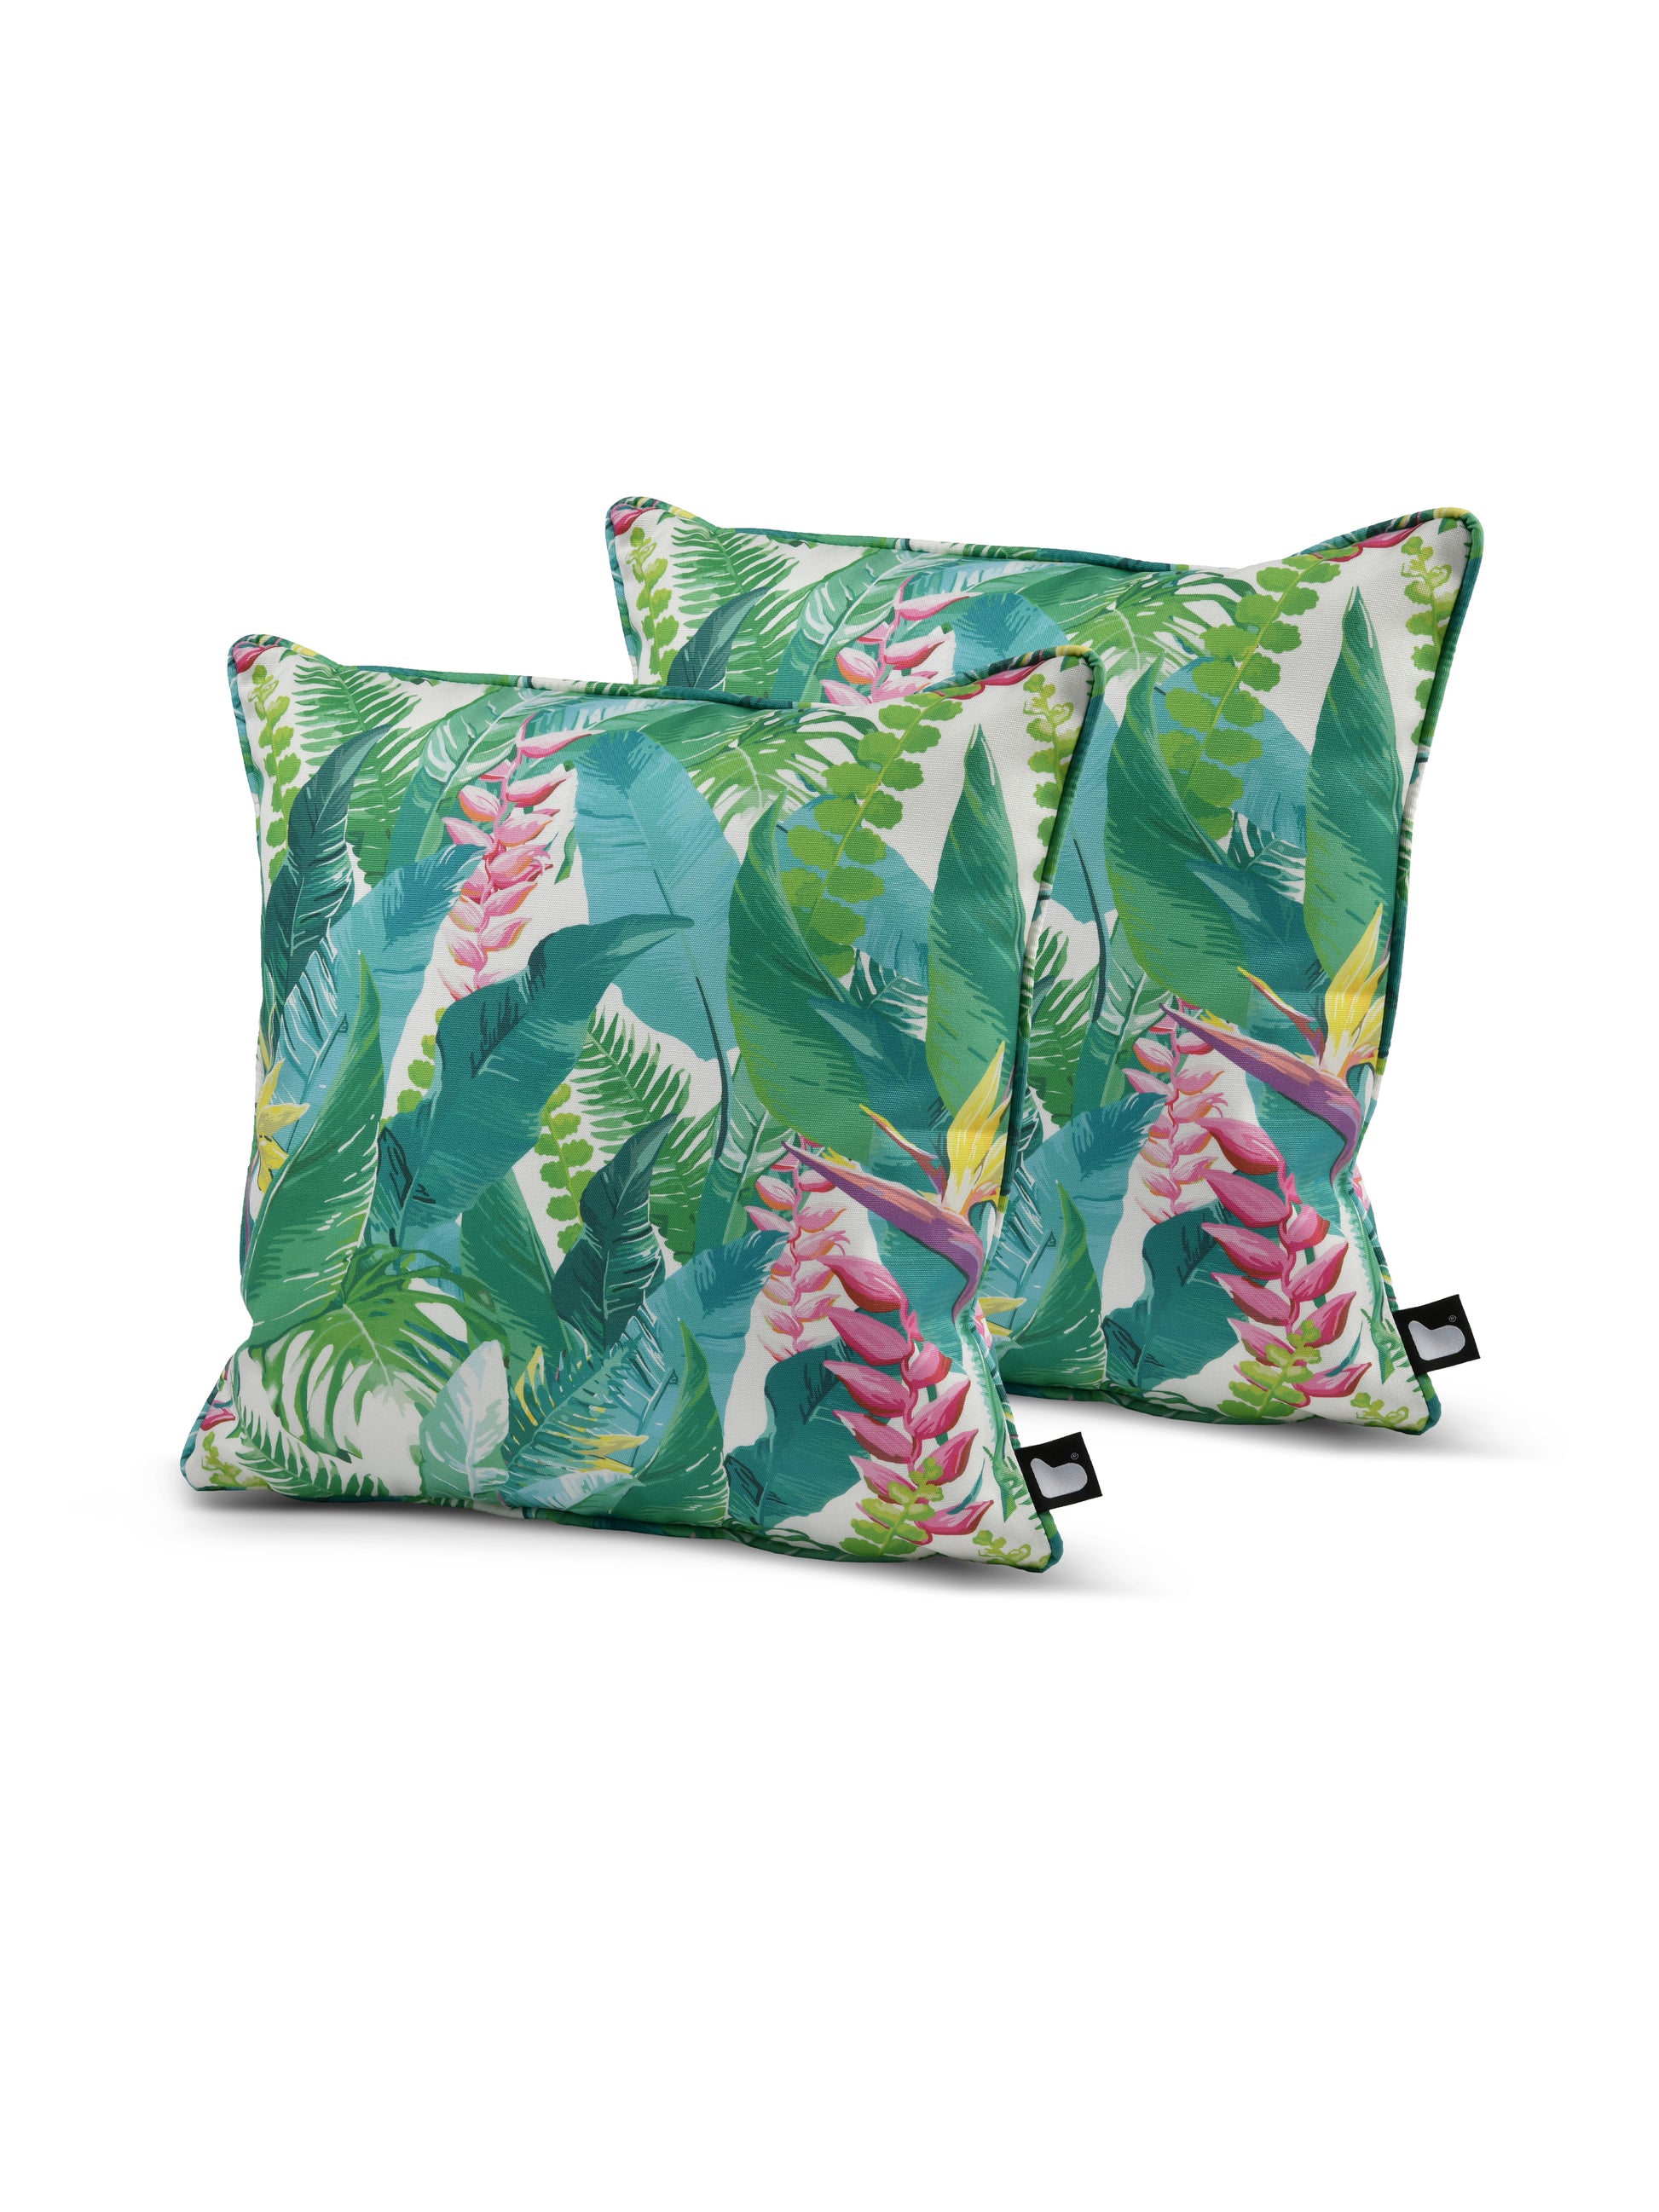 Two square decorative pillows from Brisks, boasting a vibrant tropical print with green palm leaves and pink heliconia flowers. Made with UV-resistant and splash-proof fabric, the edges are piped for a defined border. The background is plain white. This set is called the B Cushion Twin Pack Art Collection.